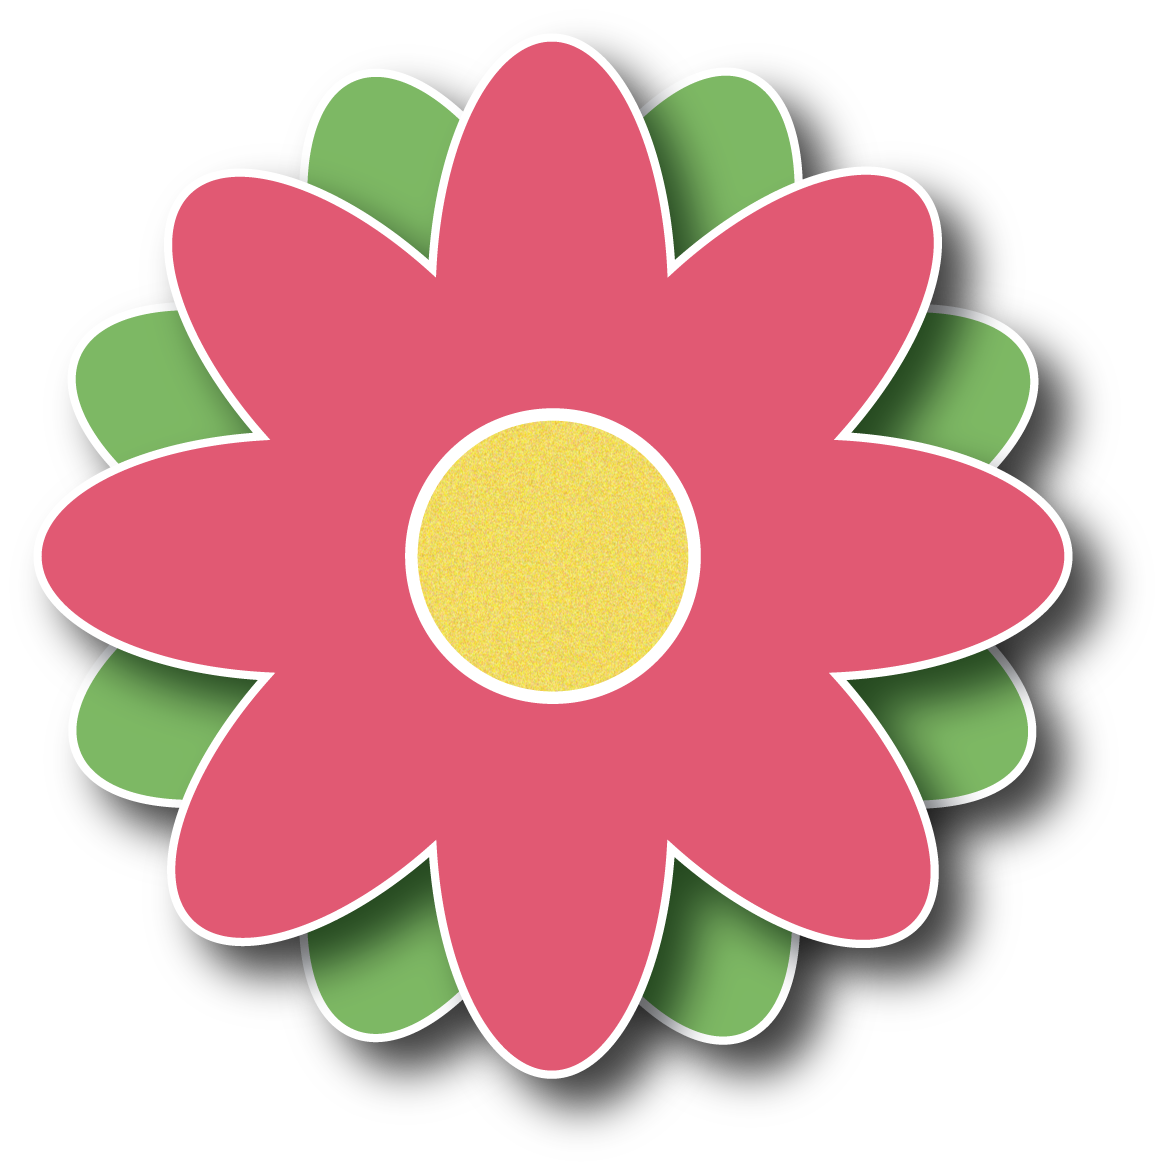 Clipart Flowers Free | Clipart Panda - Free Clipart Images